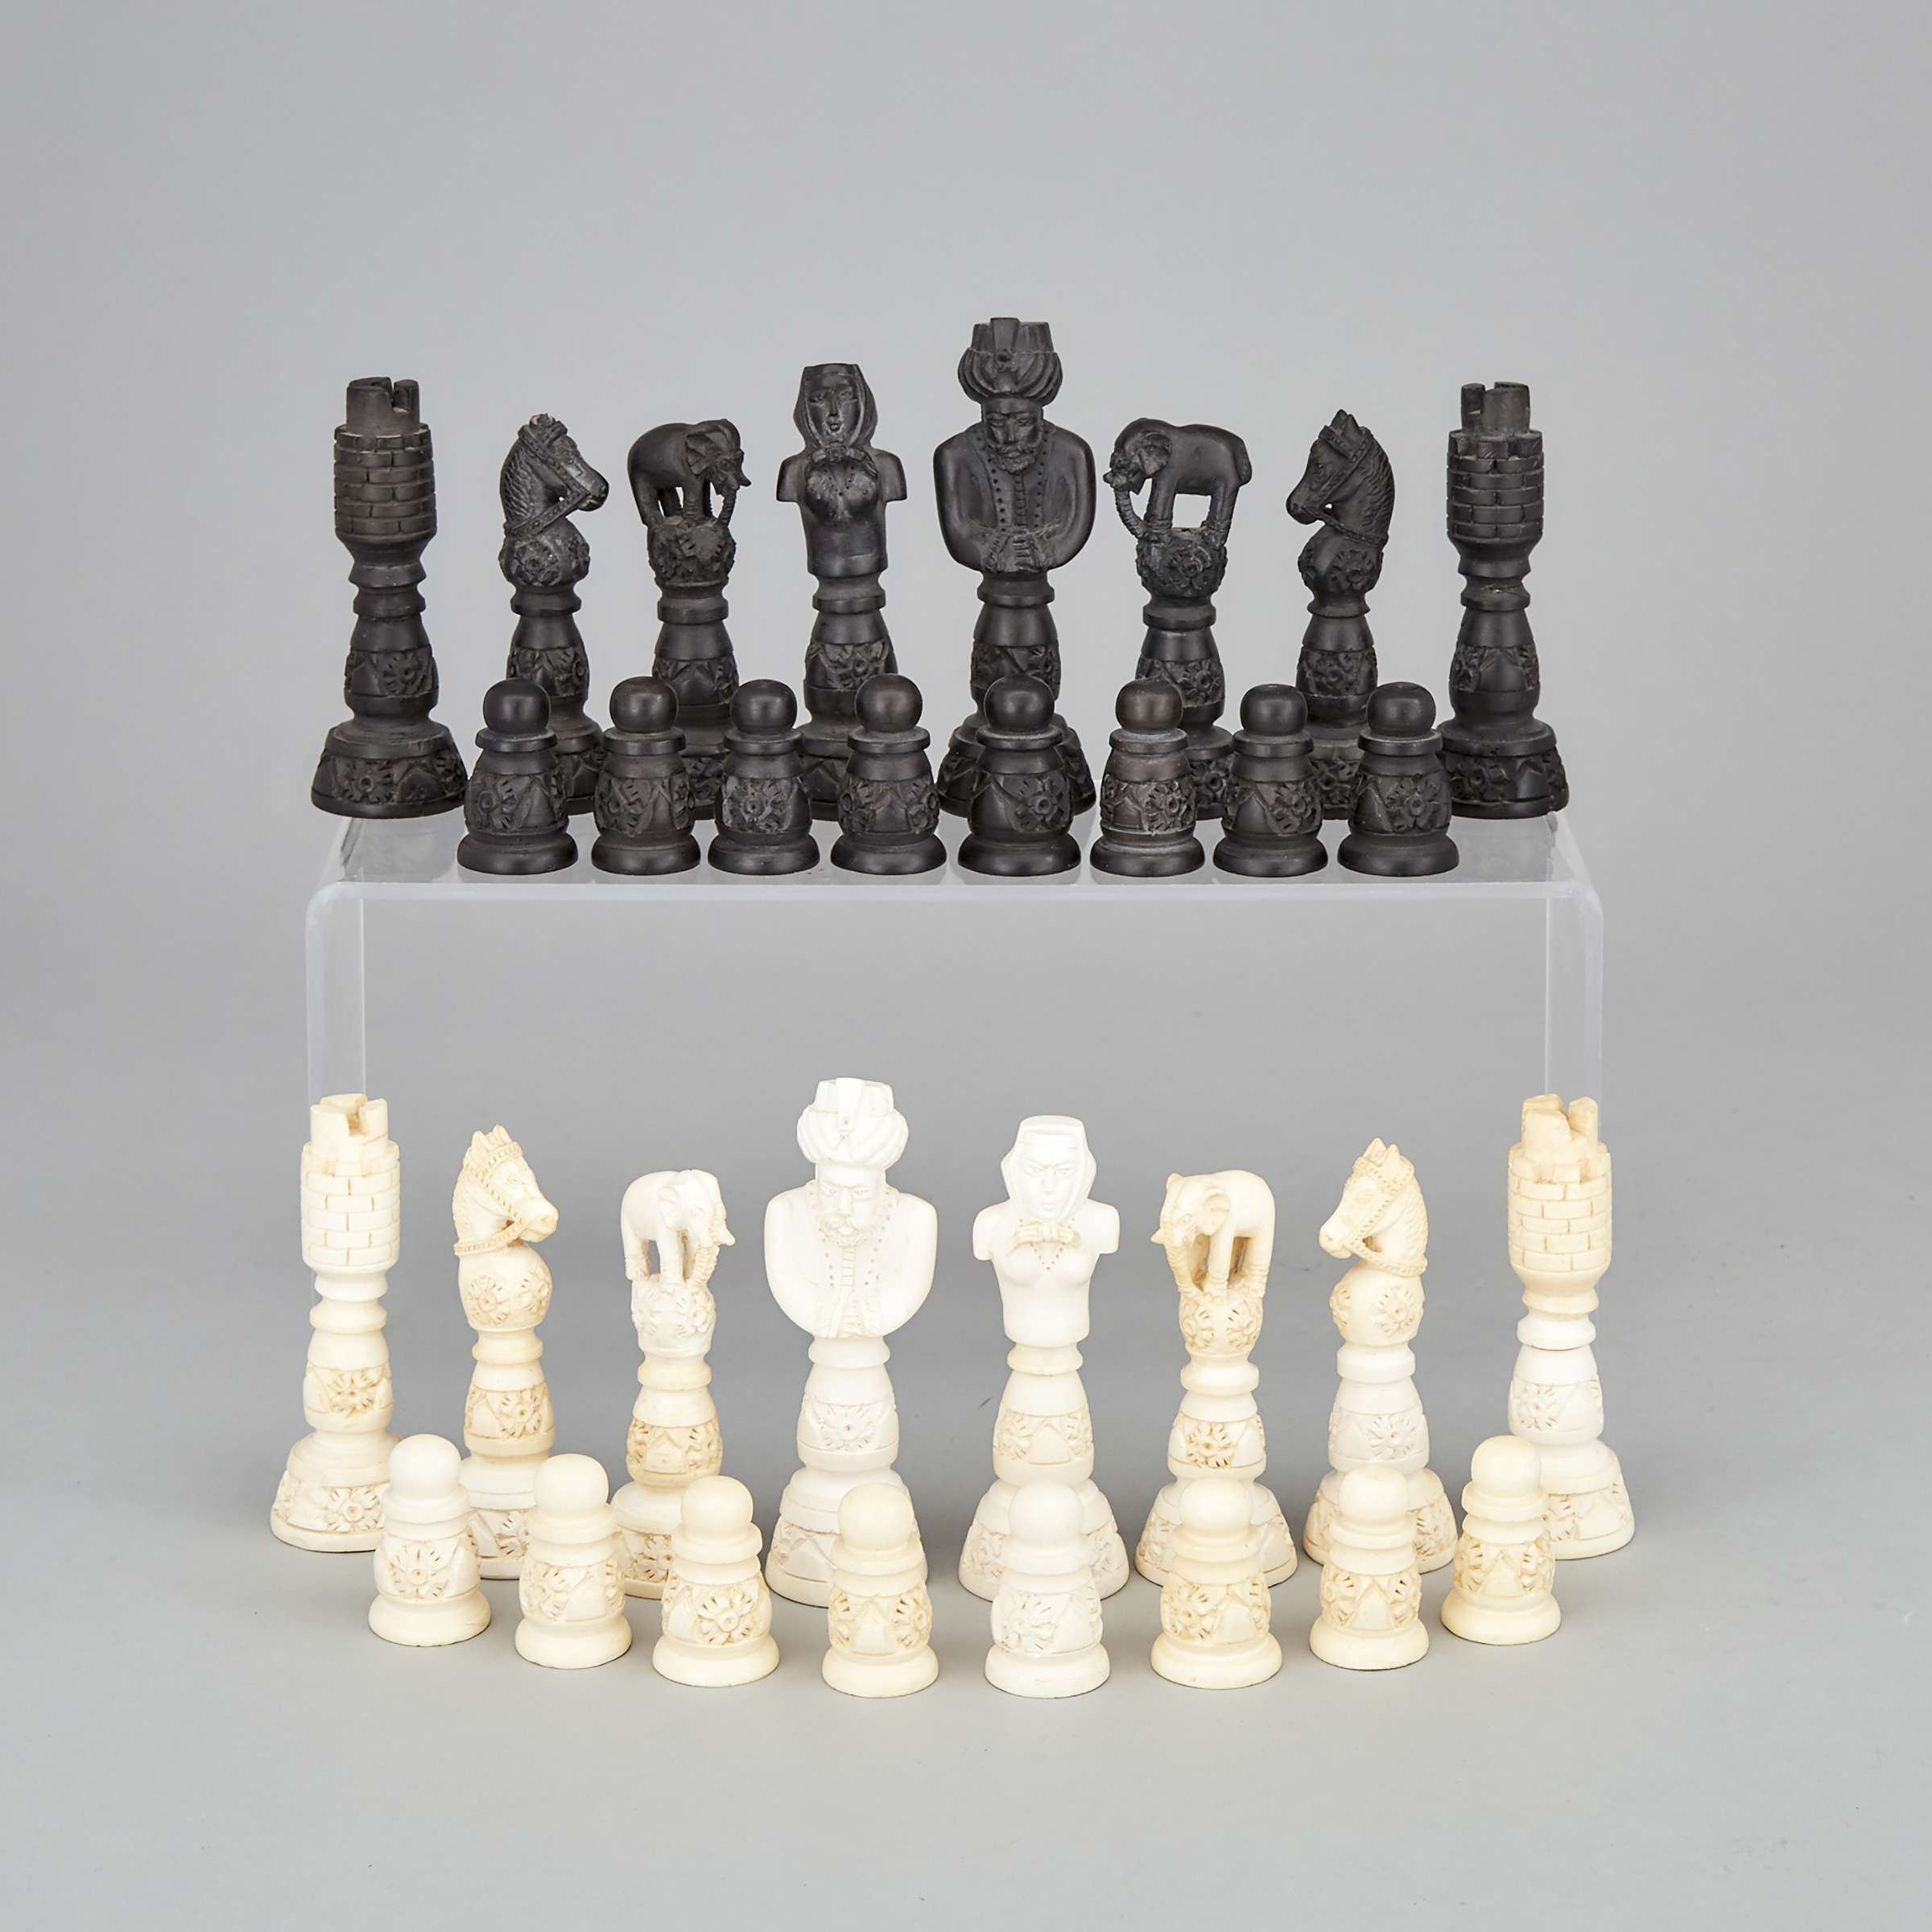 Turkish Turned and Carved Meerschaum Chess Set, early-mid 20th century